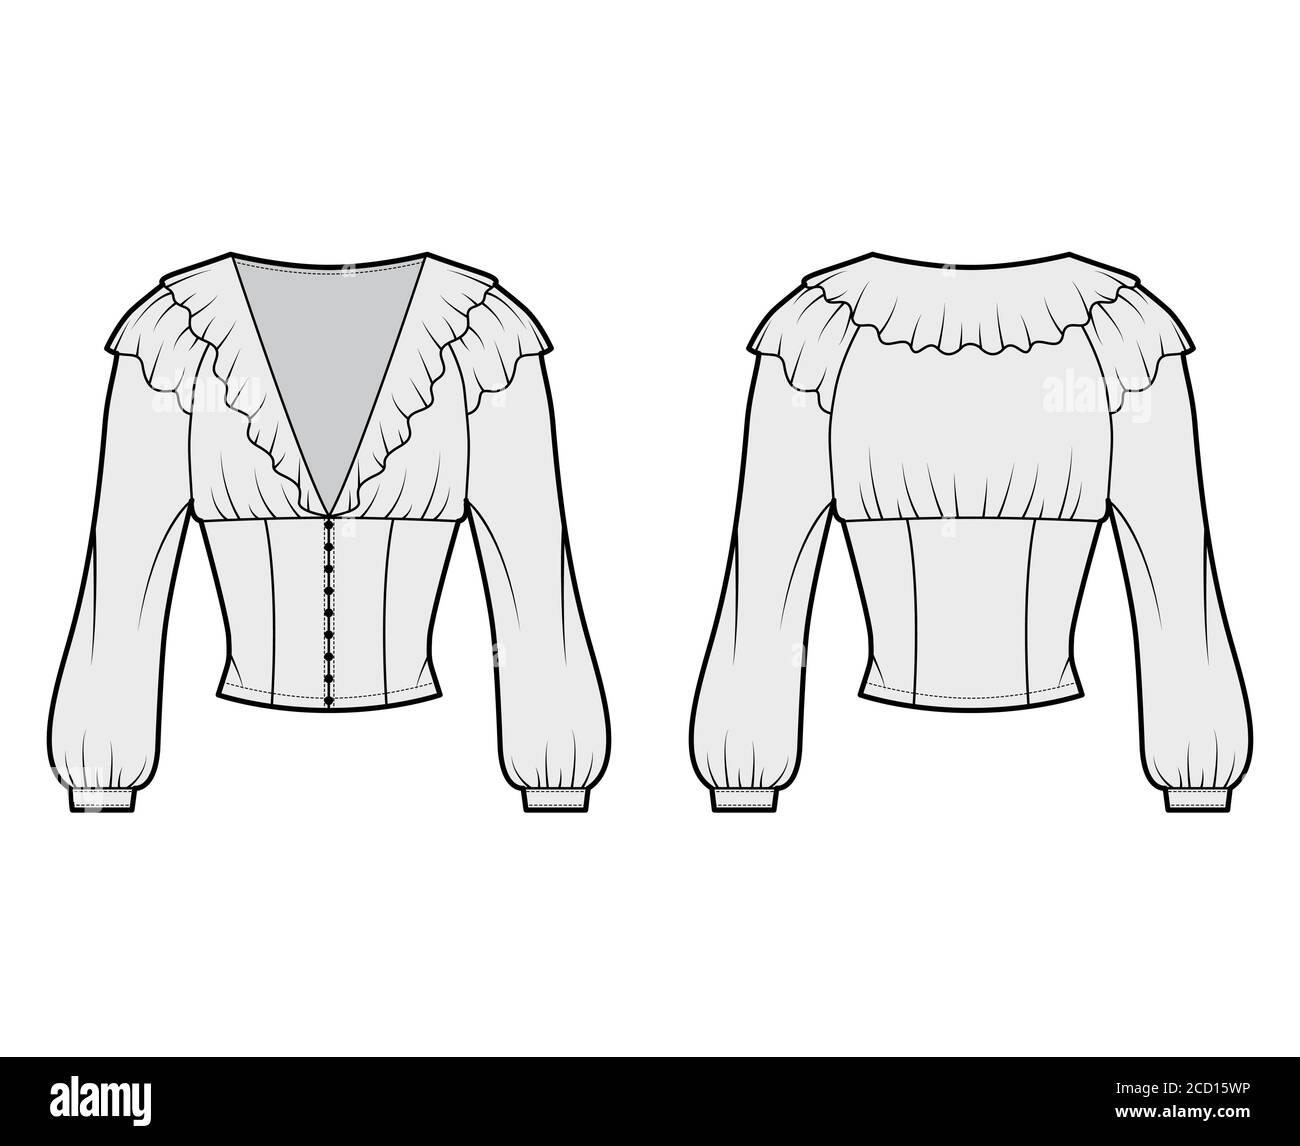 Ruffled cropped blouse technical fashion illustration with long bishop sleeves, puffed shoulders, front button fastenings. Flat apparel top template front, back grey color. Women men unisex shirt CAD Stock Vector